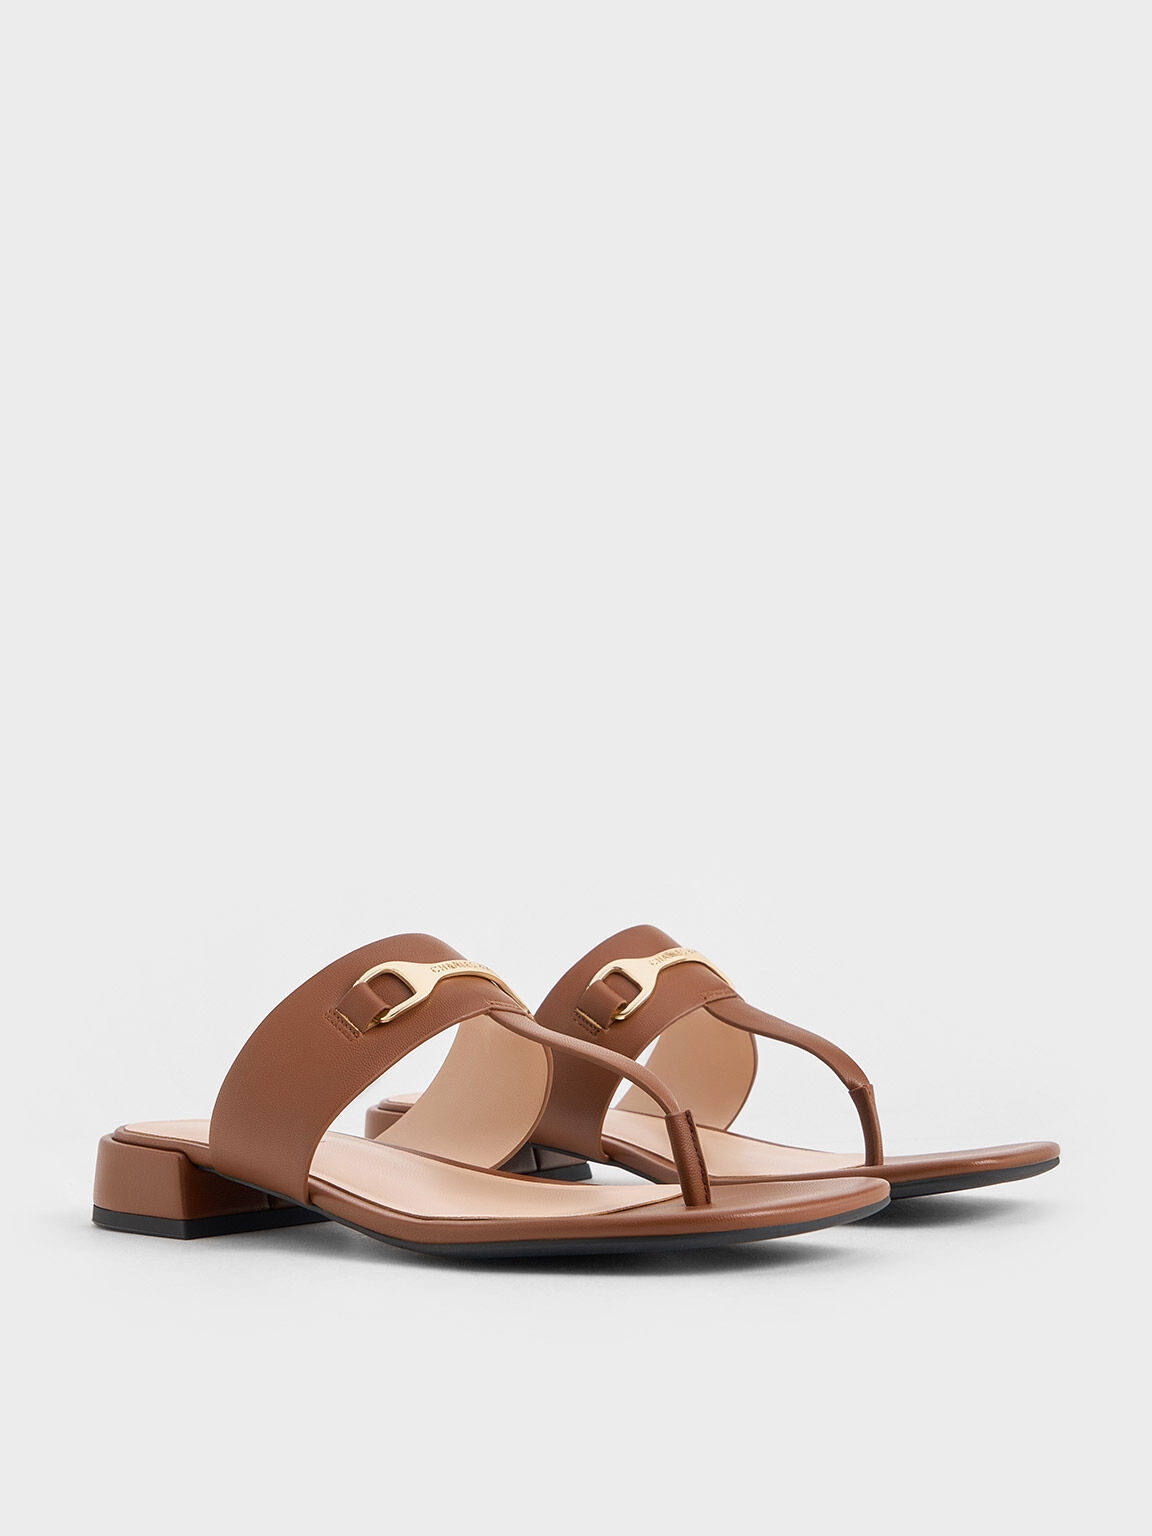 Black Metallic Accent T-Bar Thong Sandals - CHARLES & KEITH US